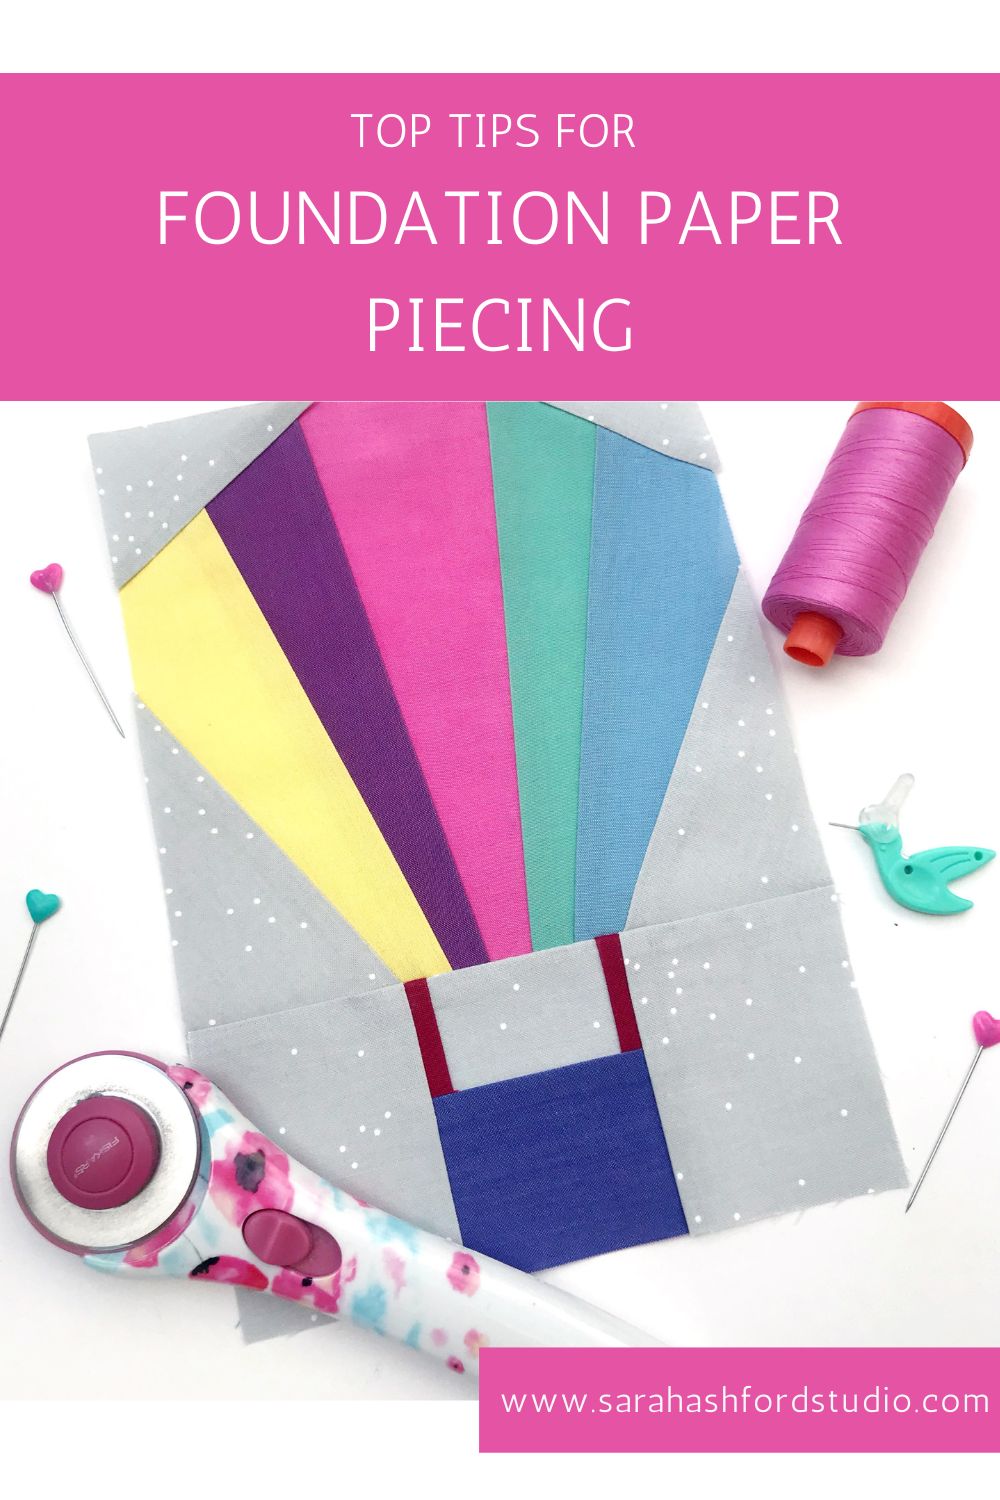 Top Tips for Foundation Paper Piecing